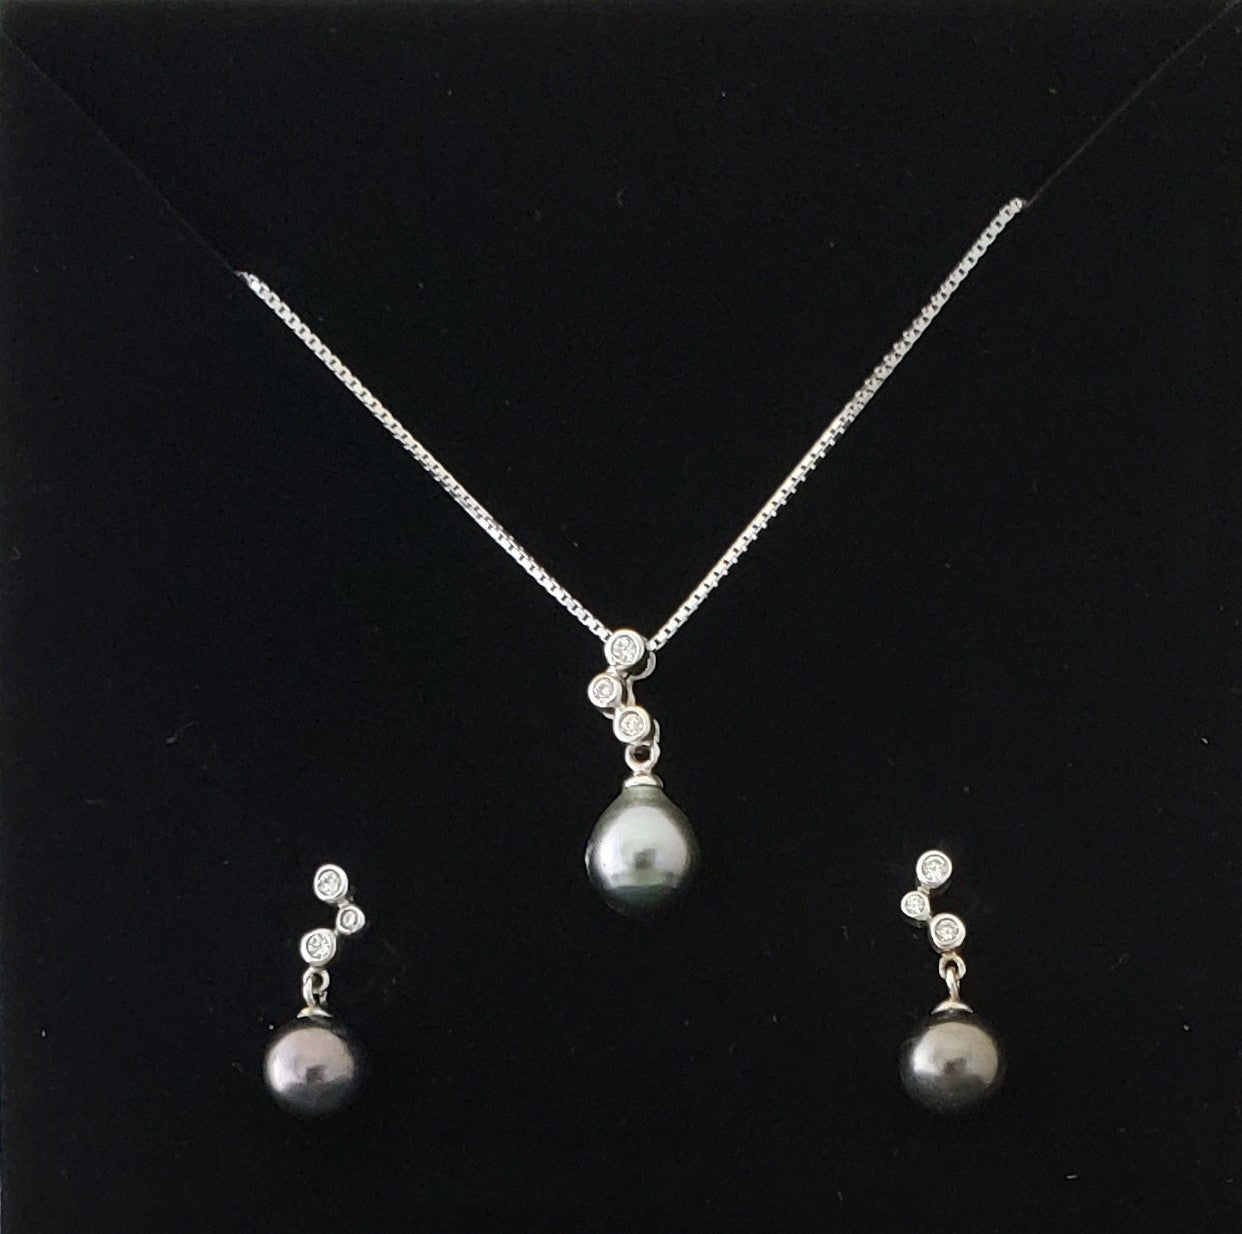 Hand Crafted Tahitian Black Pearl Earrings and Necklace Set